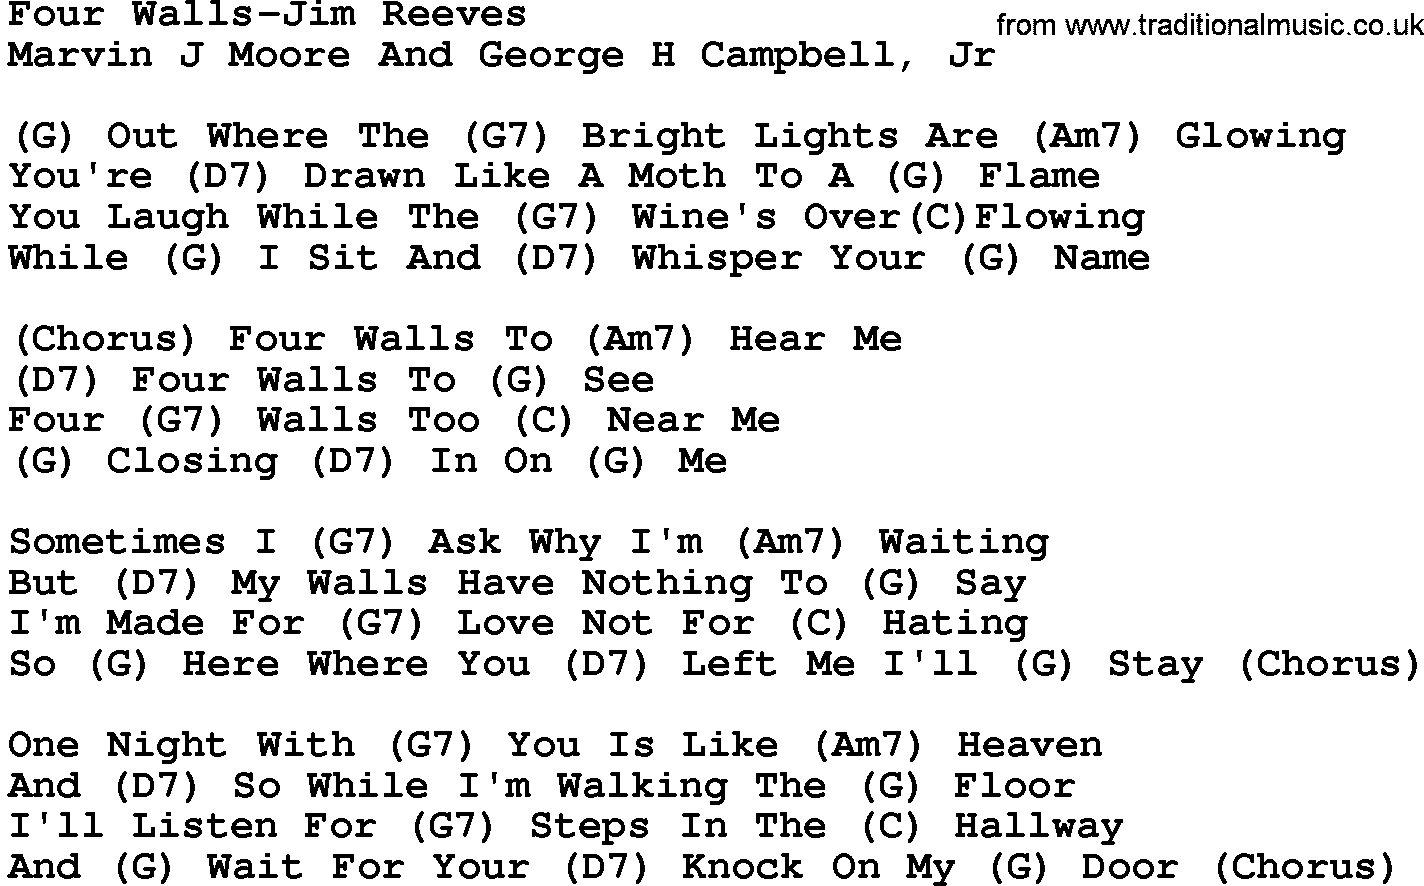 Country music song: Four Walls-Jim Reeves lyrics and chords